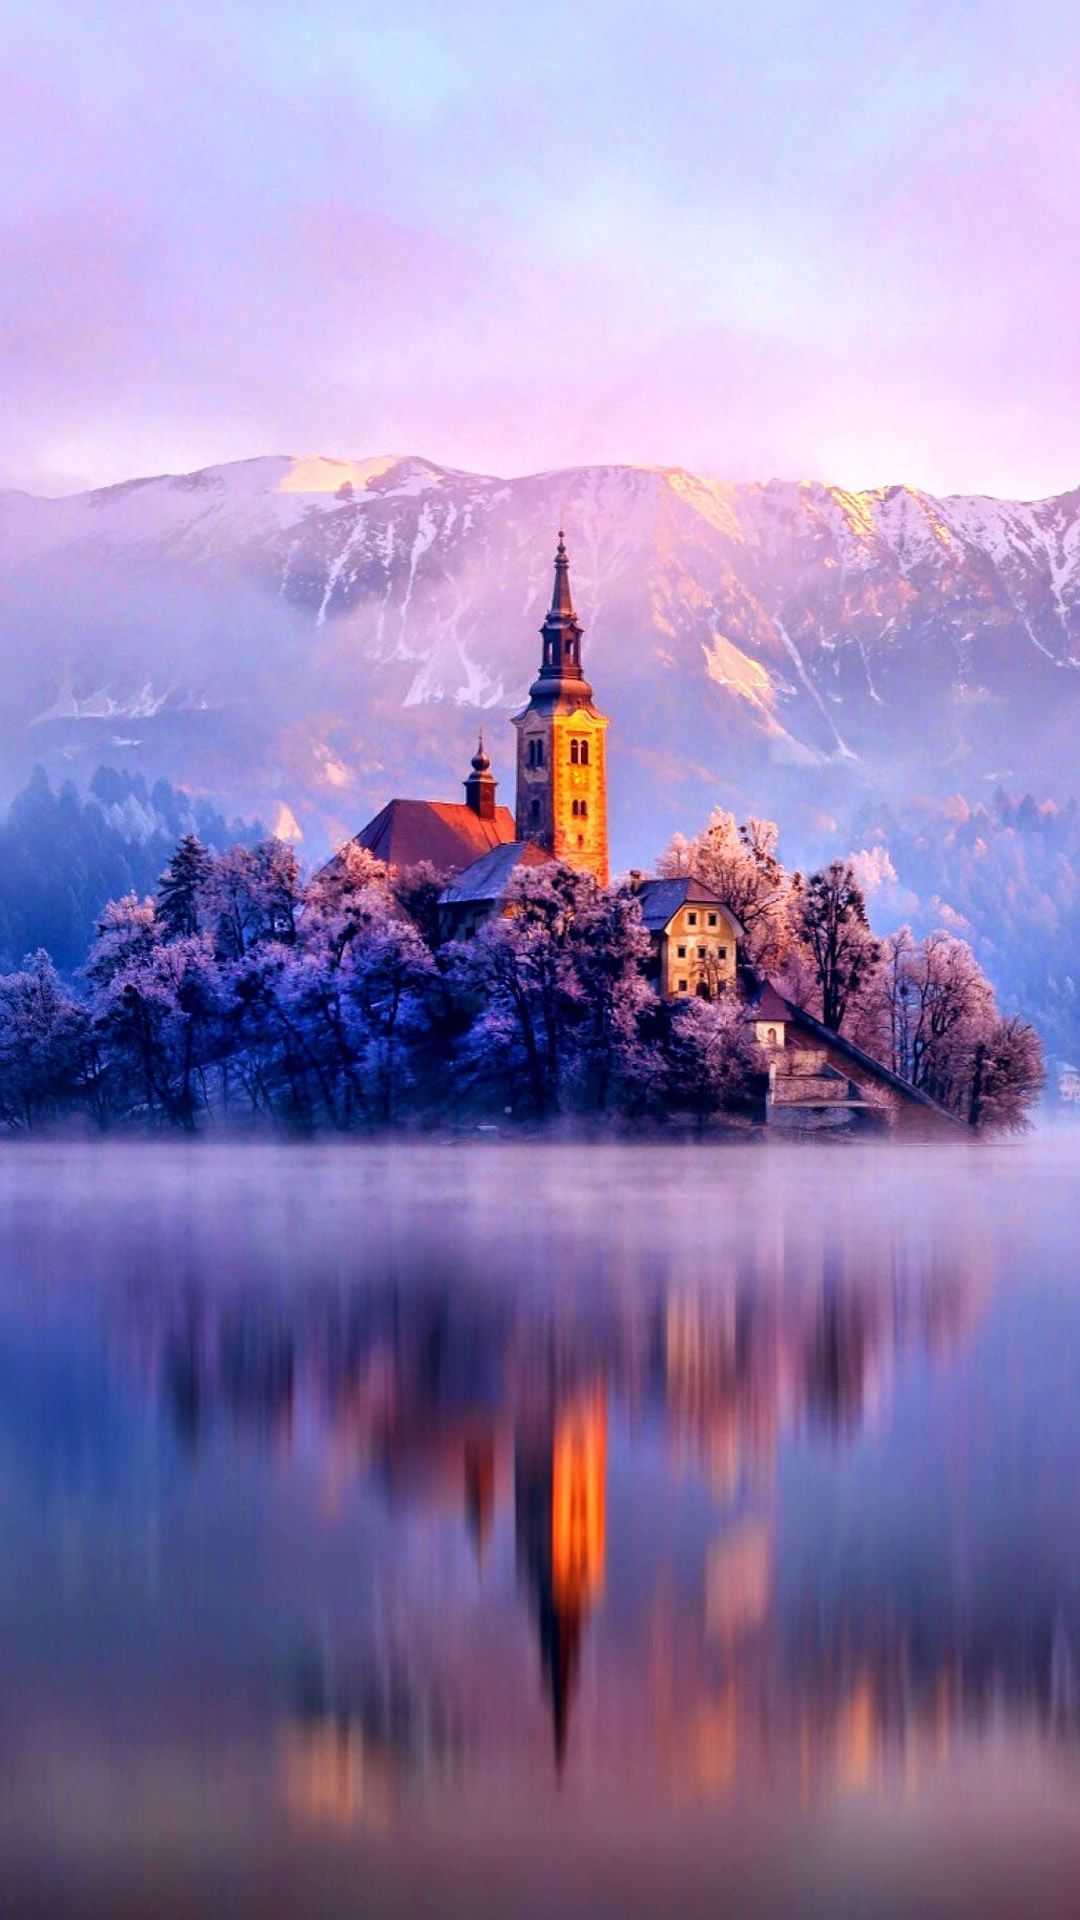 Lake Monastery Fortress Winter IPhone 6 Wallpaper Download. IPhone Wallpaper, IPad Wallpaper One Stop Download. Lake Landscape, Lake Bled, Lake Bled Slovenia